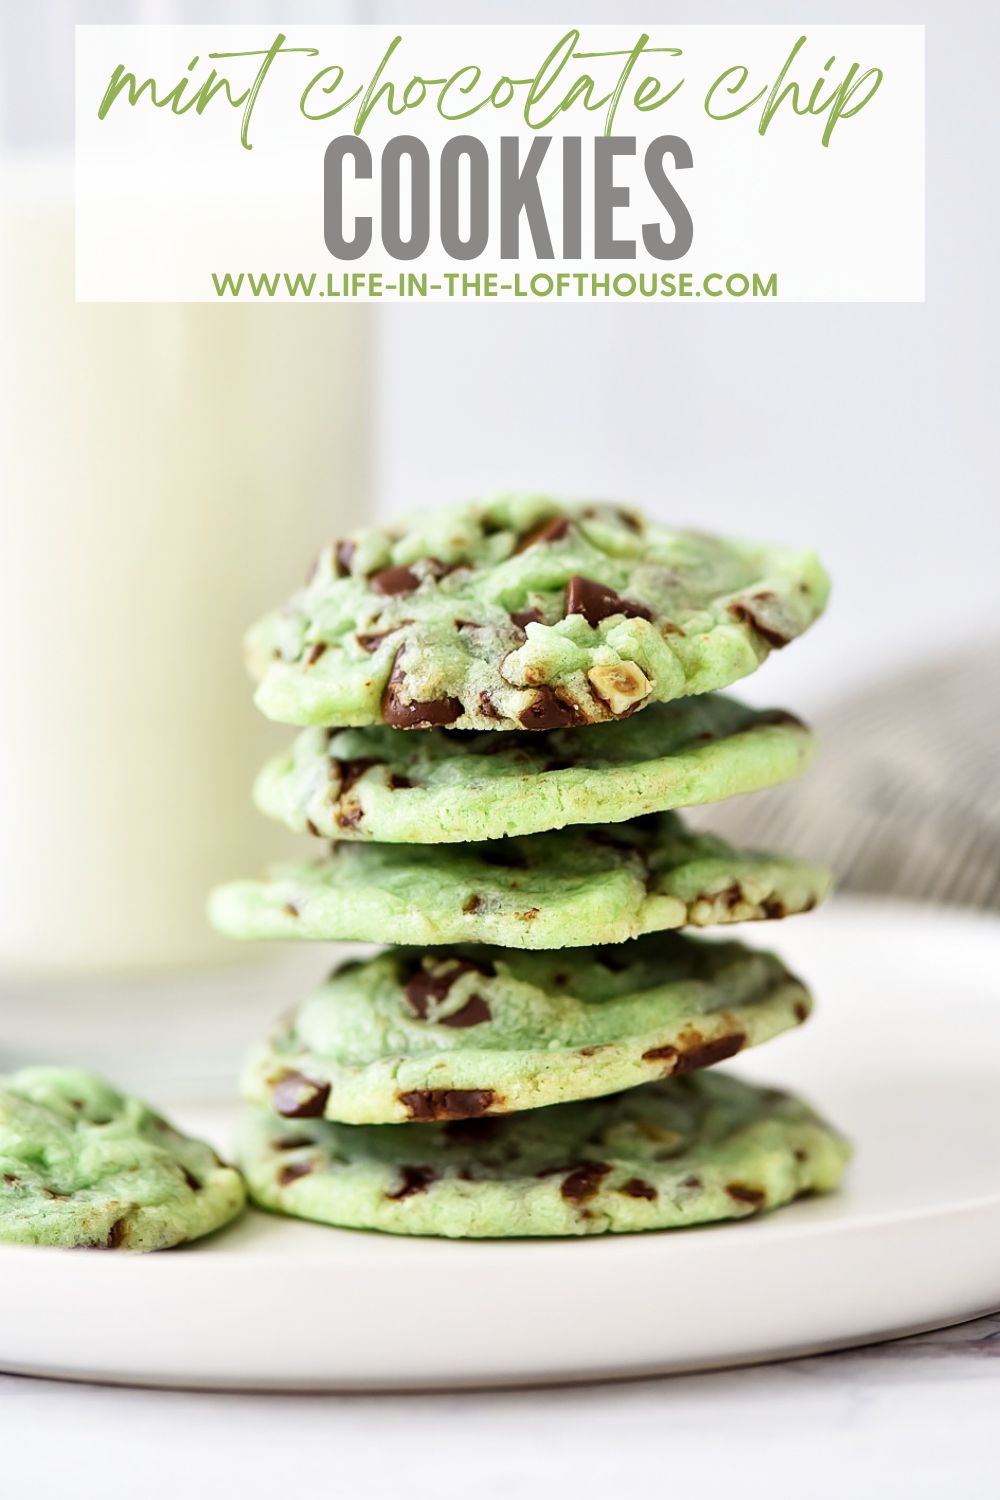 Mint Chocolate Chip Cookies are delicious, soft cookies full of mint flavor and chocolate chips. Life-in-the-Lofthouse.com